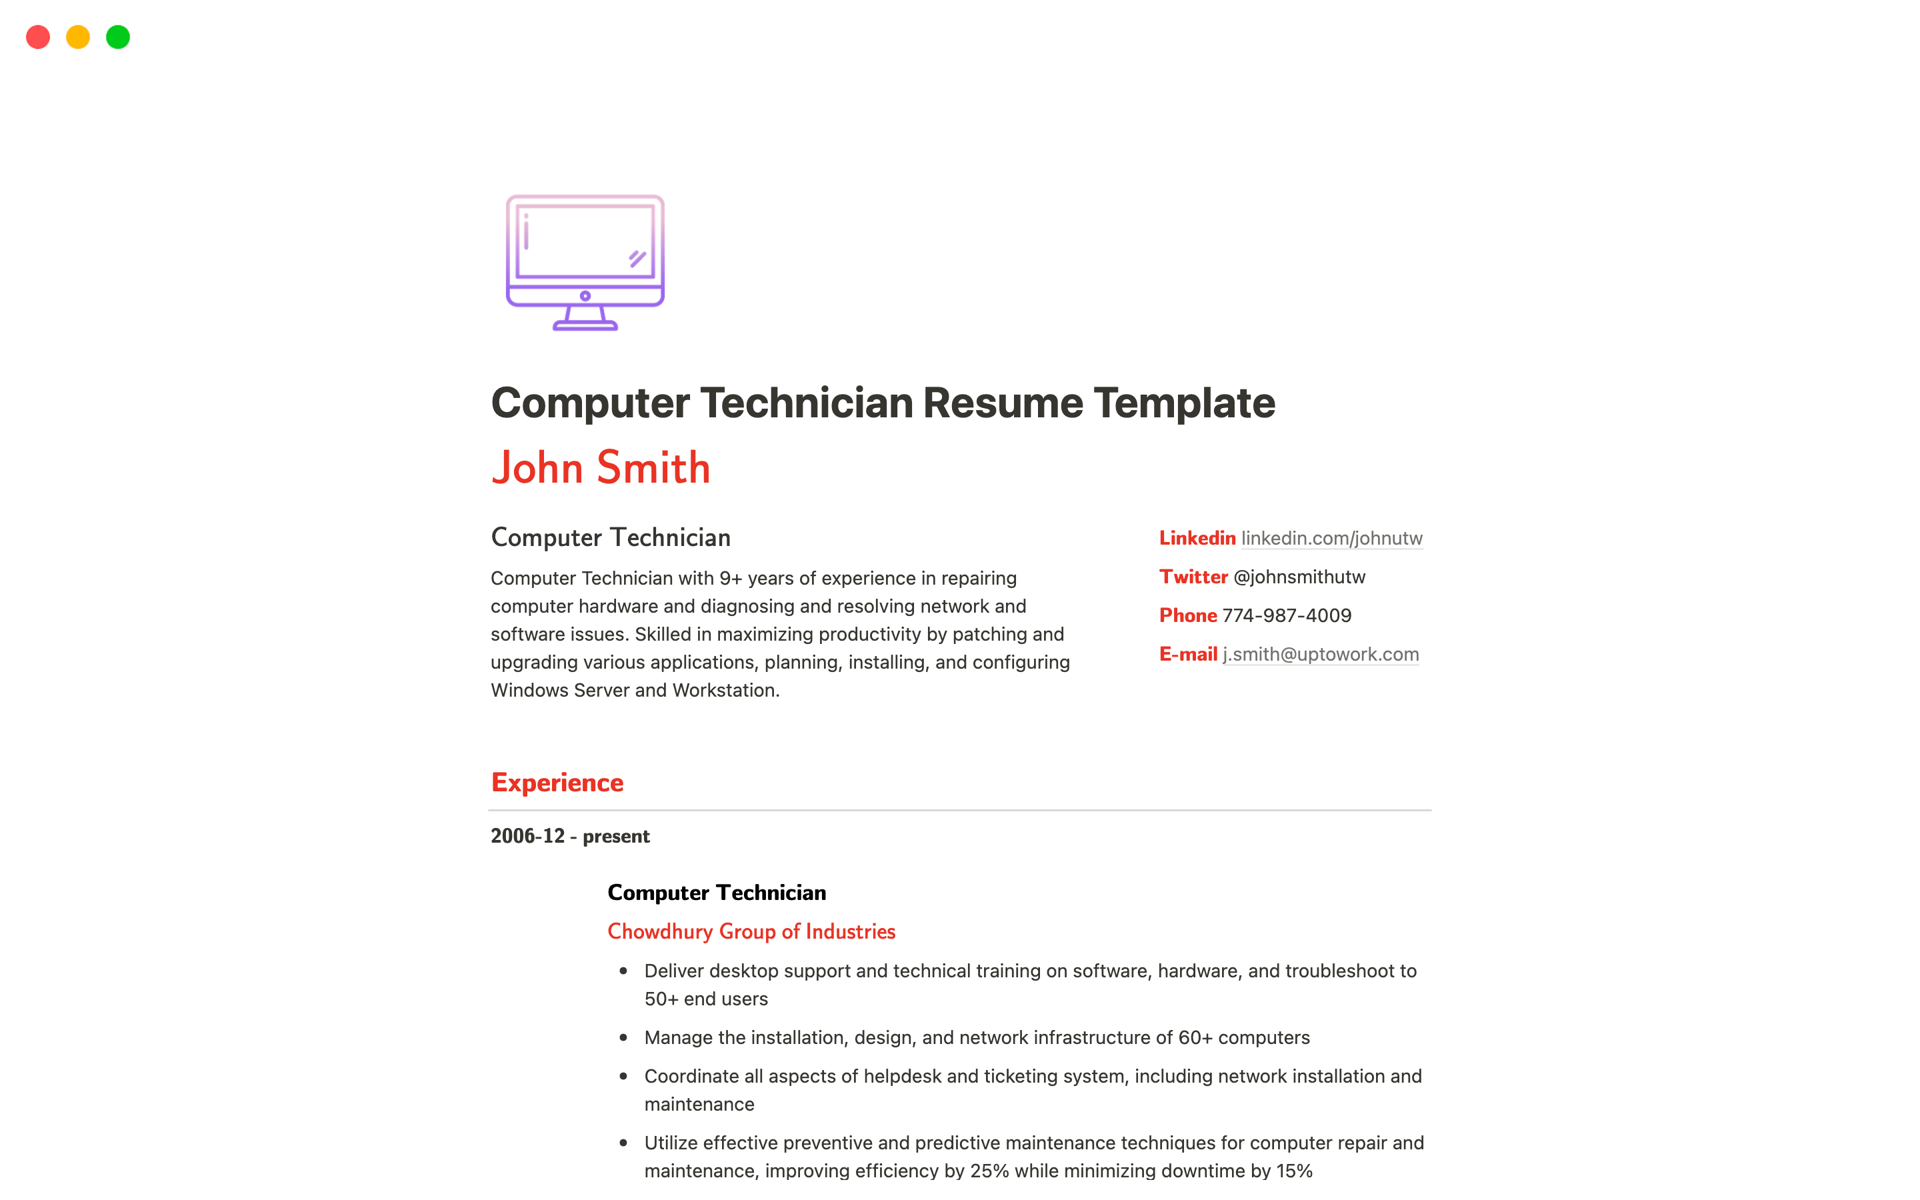 💻 Computer Technician Odyssey: Tech Mastery Edition 🌟
Embark on a tech-savvy journey with our Computer Technician Resume Template, meticulously crafted to guide you through showcasing your skills and experiences.